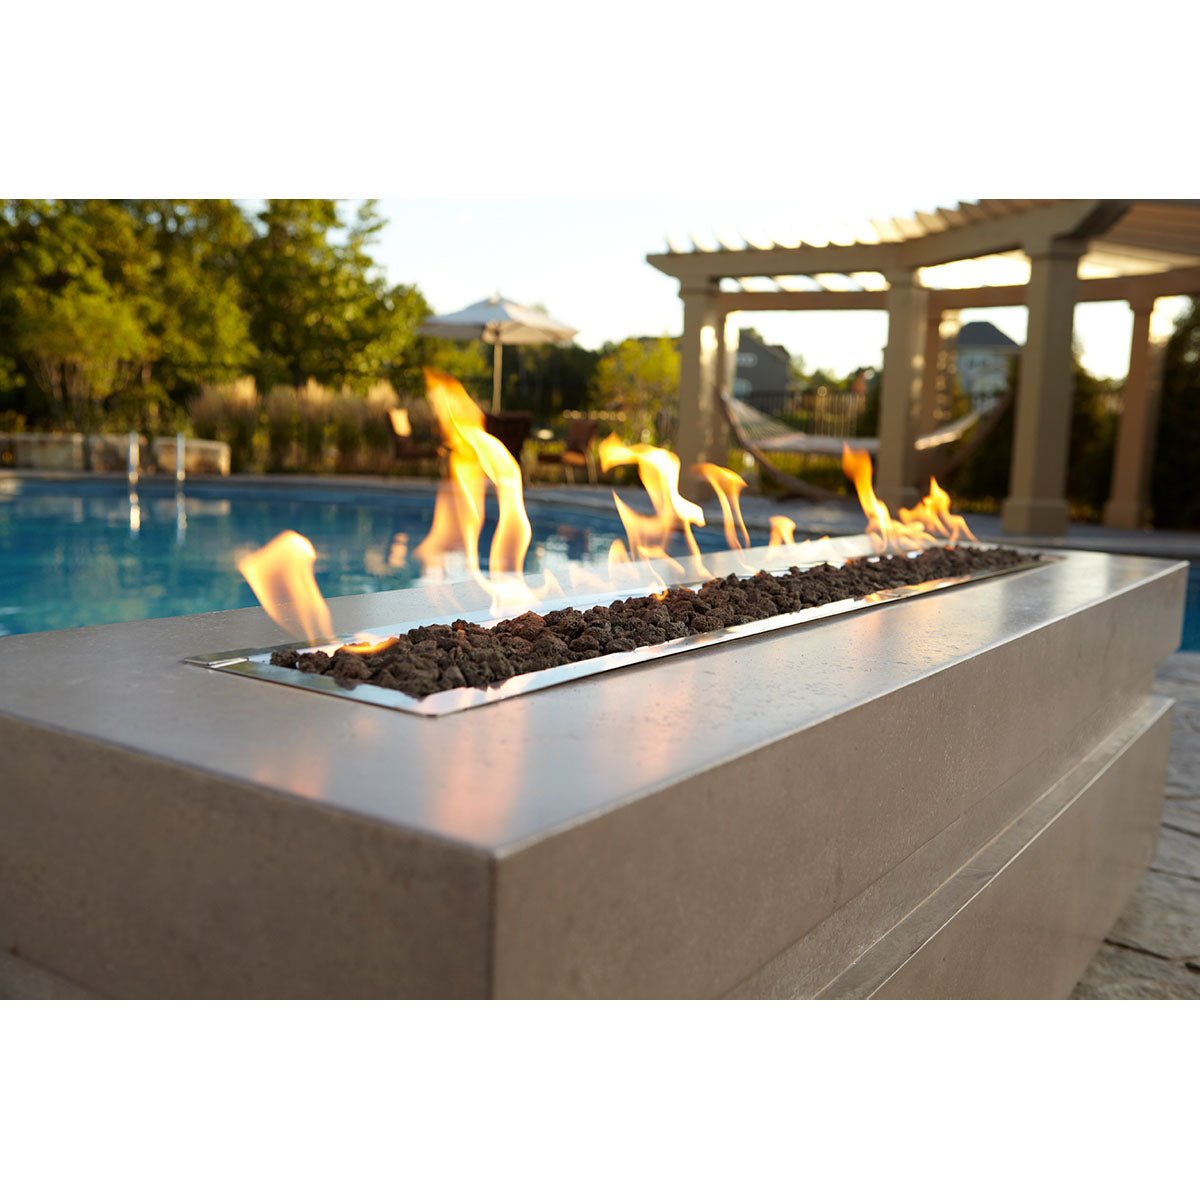 Majestic Plaza 24 Outdoor Linear Fire Pit Burner with Match Light Ignition Starter Kit